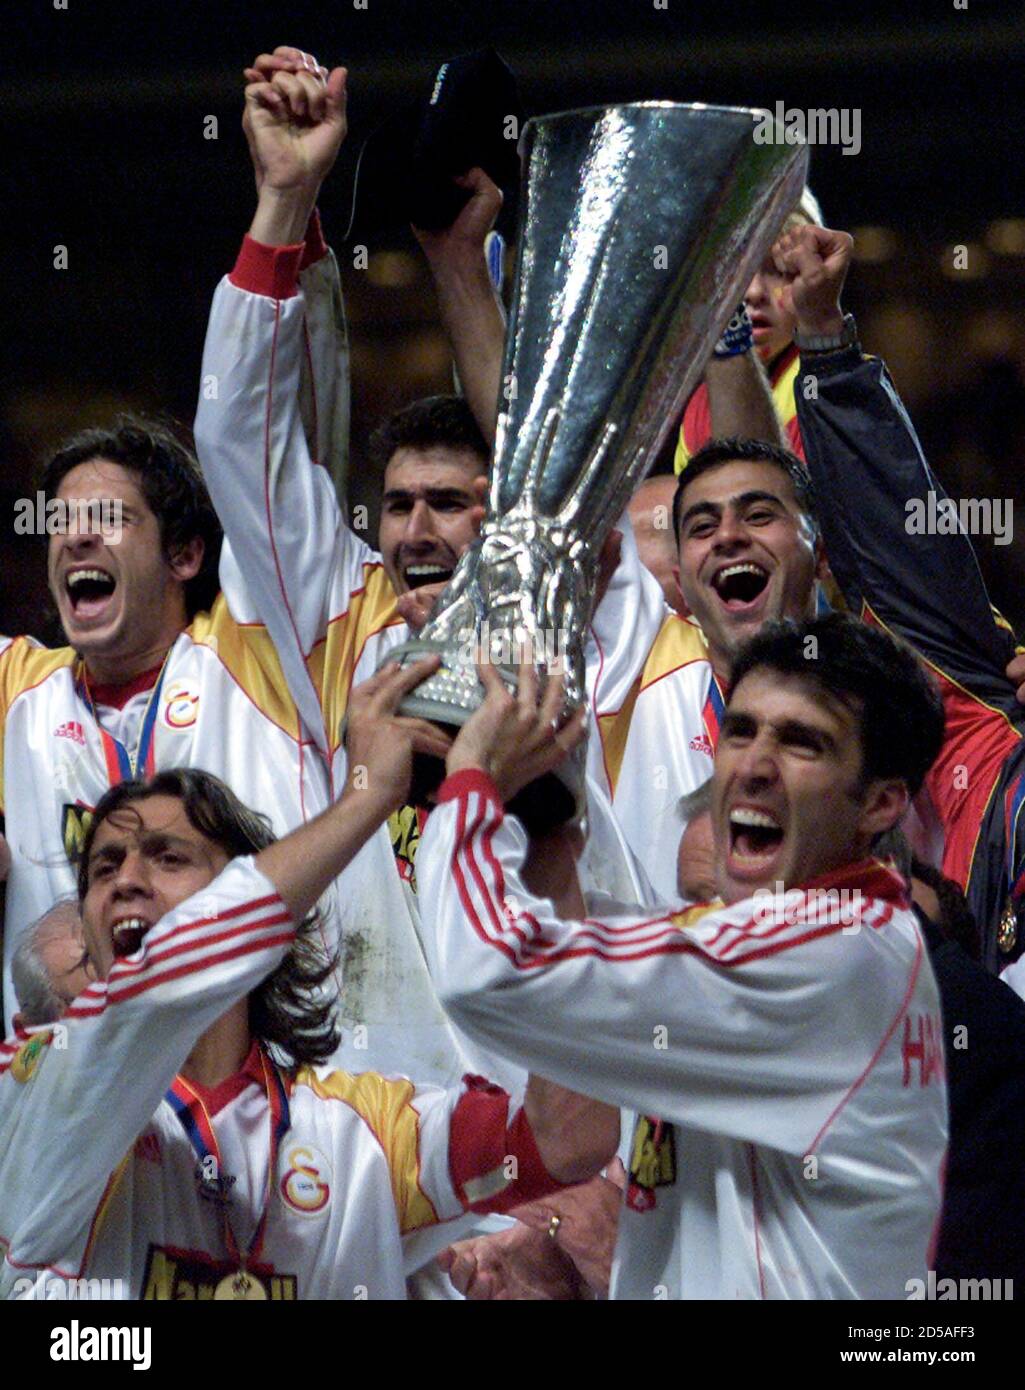 Galatasaray's Hakan Sukur (R) and Korkmaz Bulent (L) lift the UEFA Cup  after beating [Arsenal] in the final in Copenhagen's Parken stadium May 17.  Galatasaray won 4-1 on penalties Stock Photo - Alamy